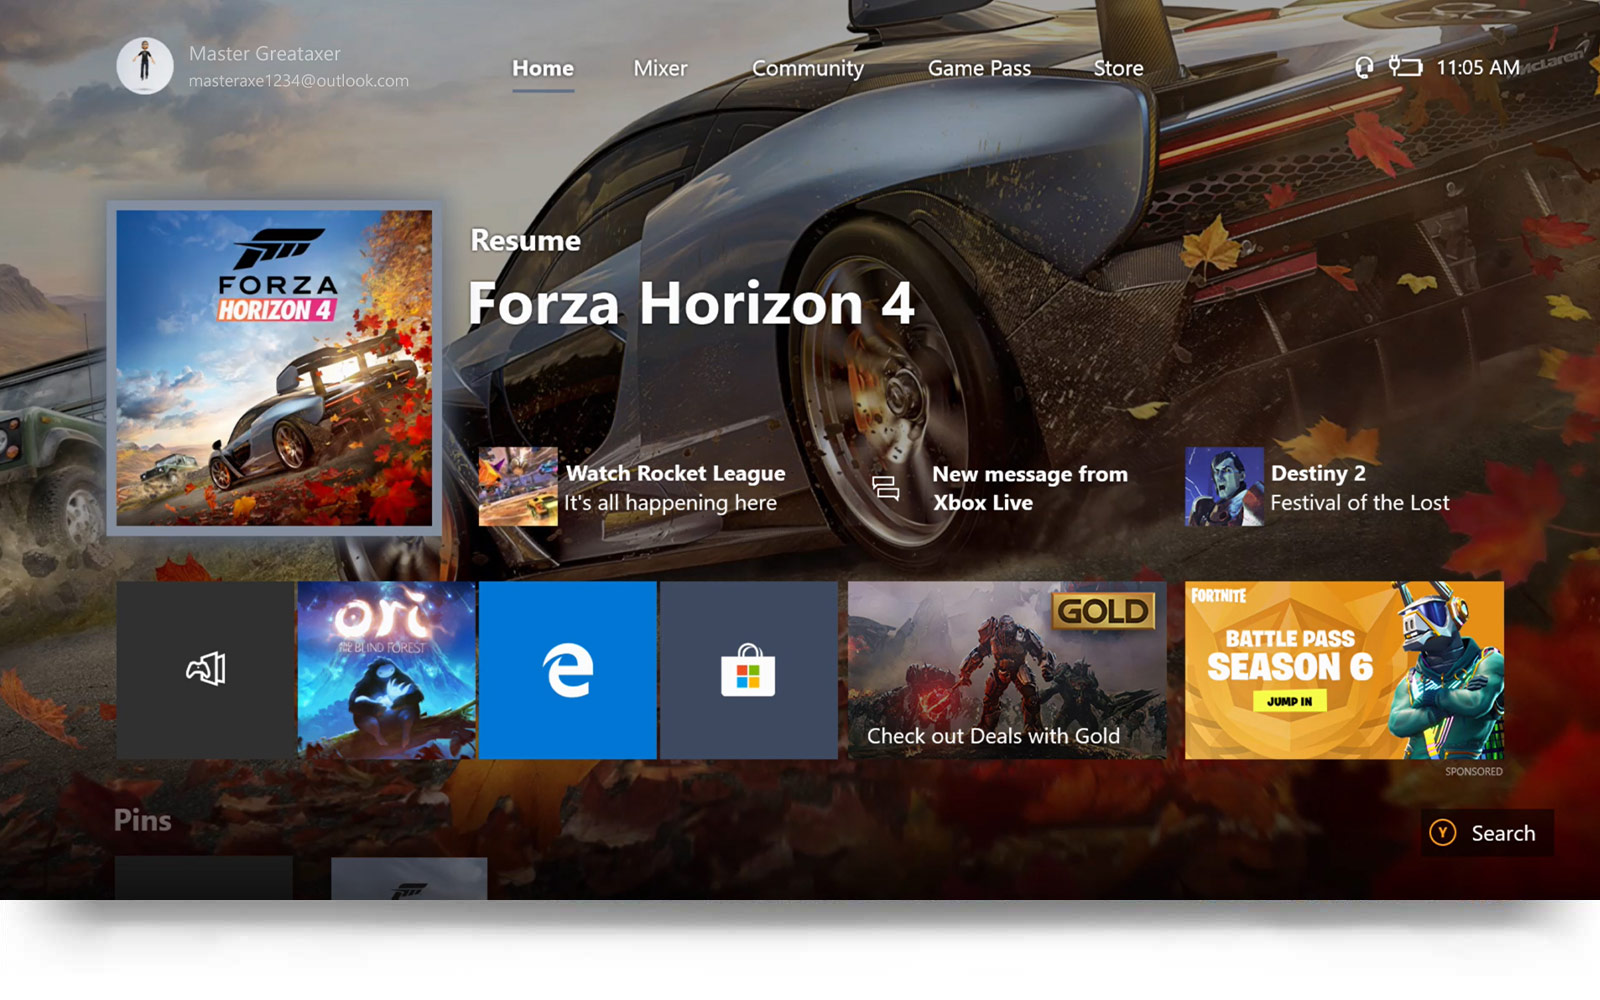 New Home Screen for the Xbox Dashboard showing Forza Horizon 4